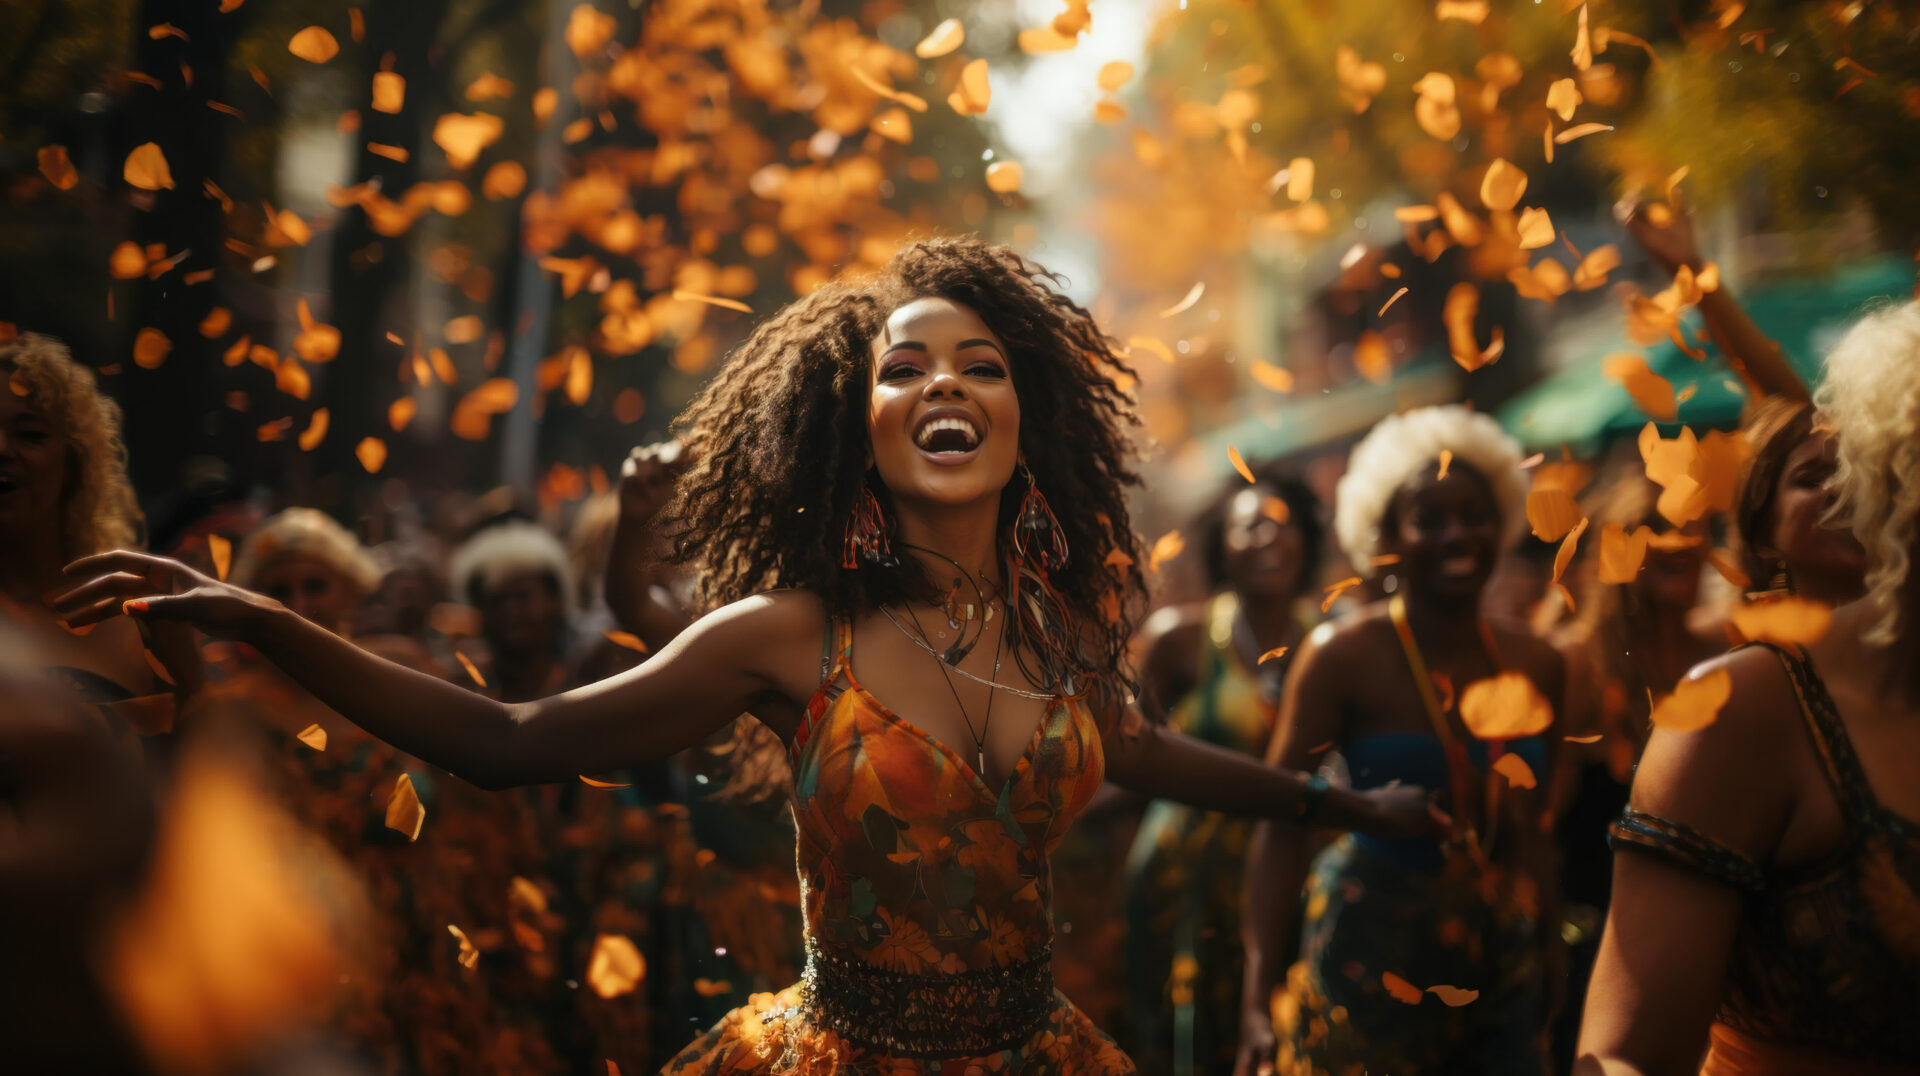 THE FACTS ABOUT THE NOTTING HILL CARNIVAL